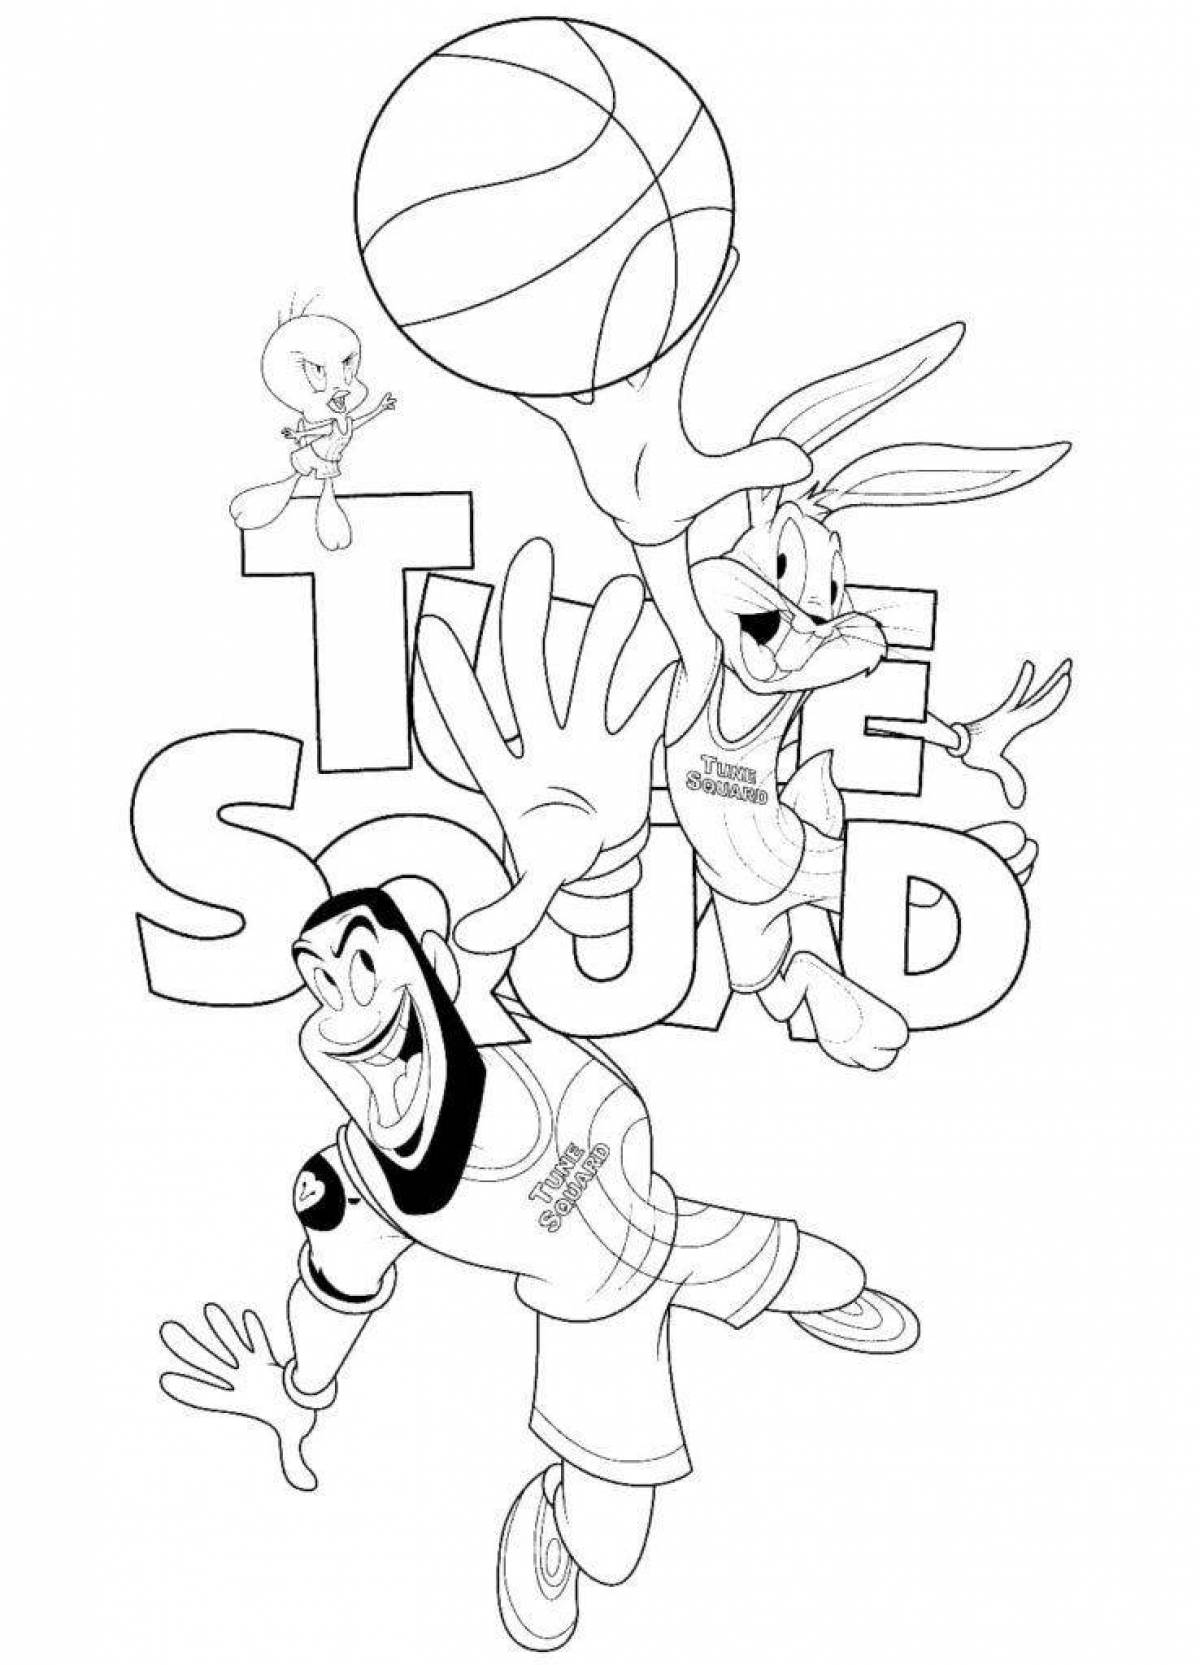 Amazing Space Jam Coloring Page